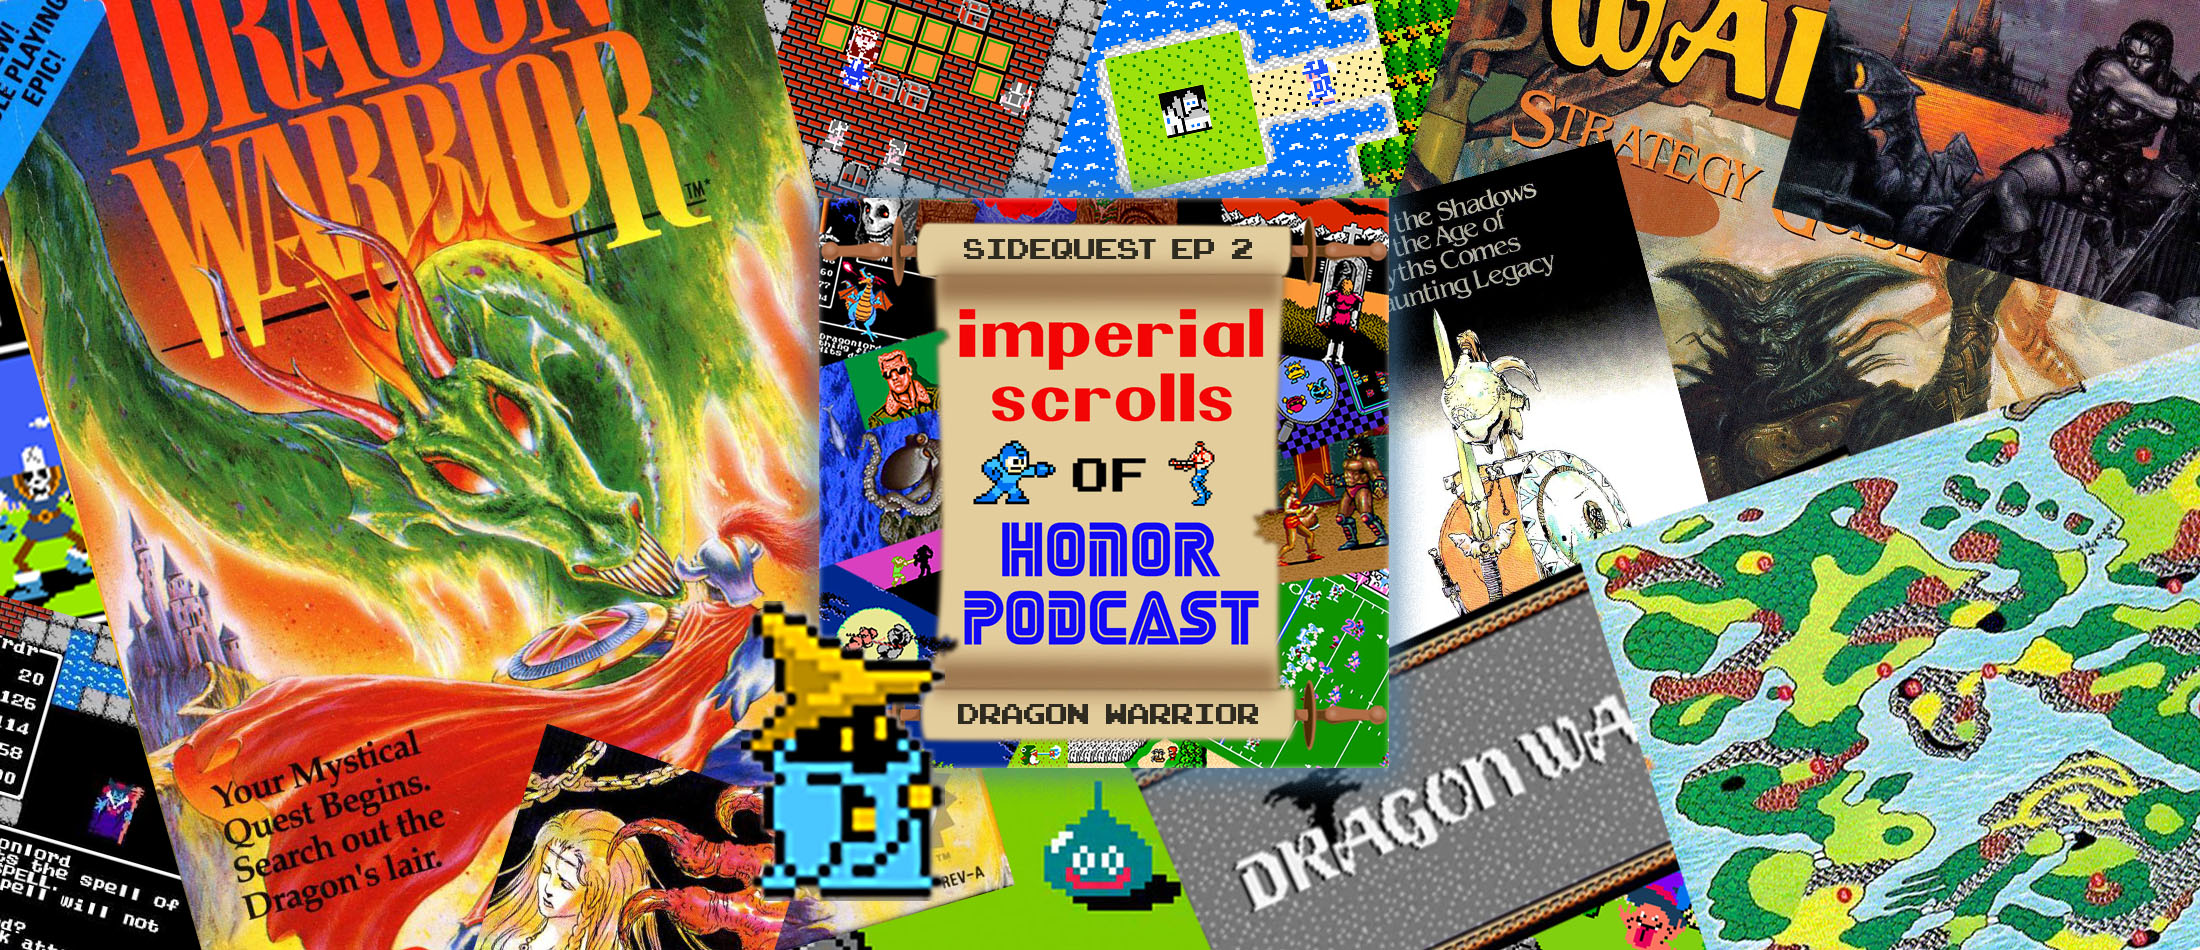 Imperial Scrolls of Honor Podcast - SIDEQUEST: Dragon Warrior Ep 2